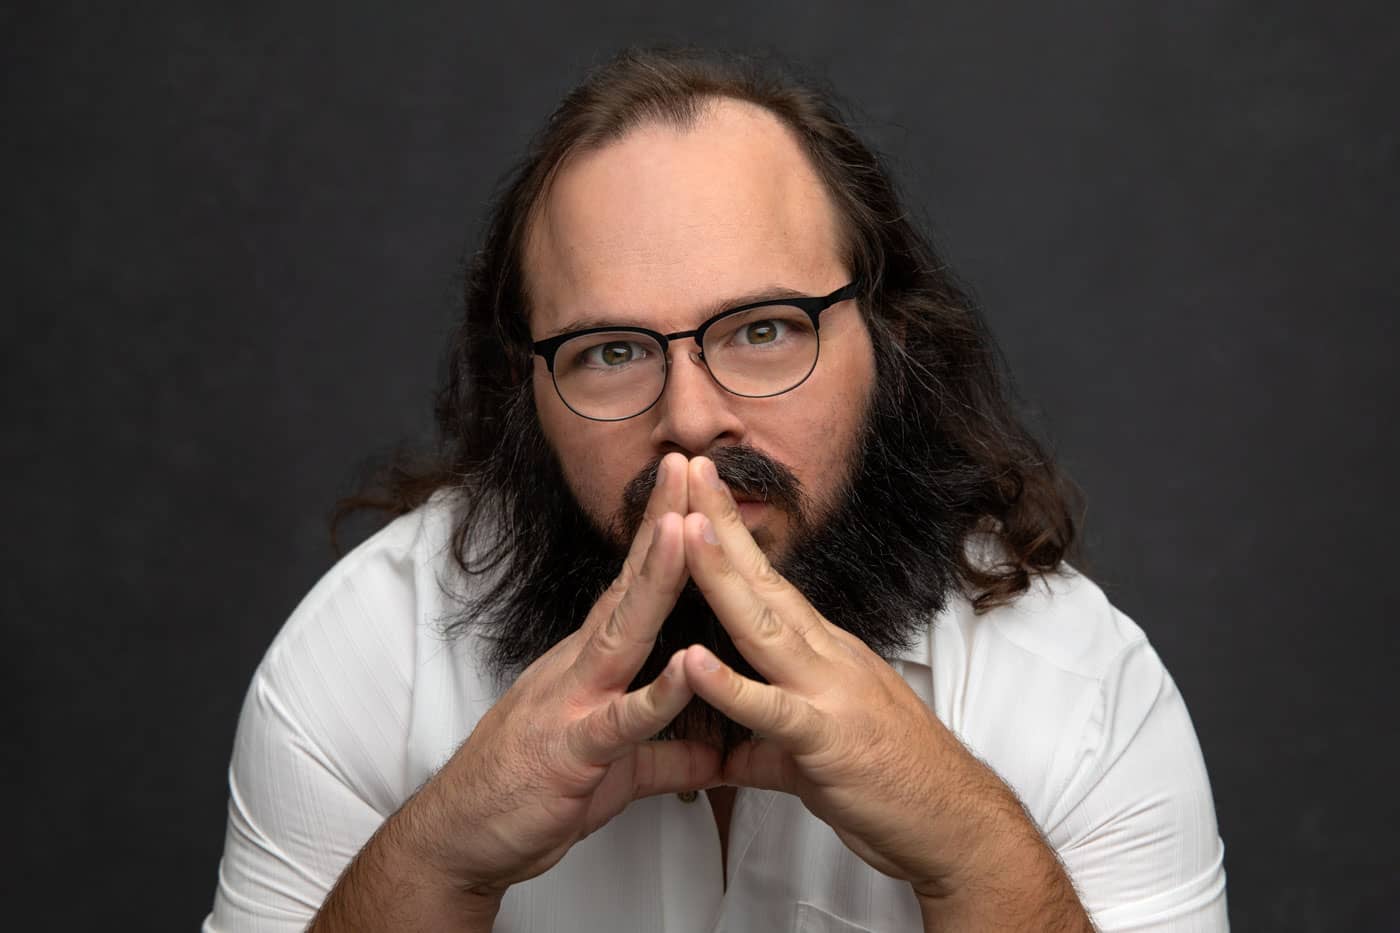 Branding photo of an actor playing a clever character with evil intent. Wearing a white shirt and black glasses, his fingers together covering his mouth. Jonathan Hano Acting and Headshot Photography.